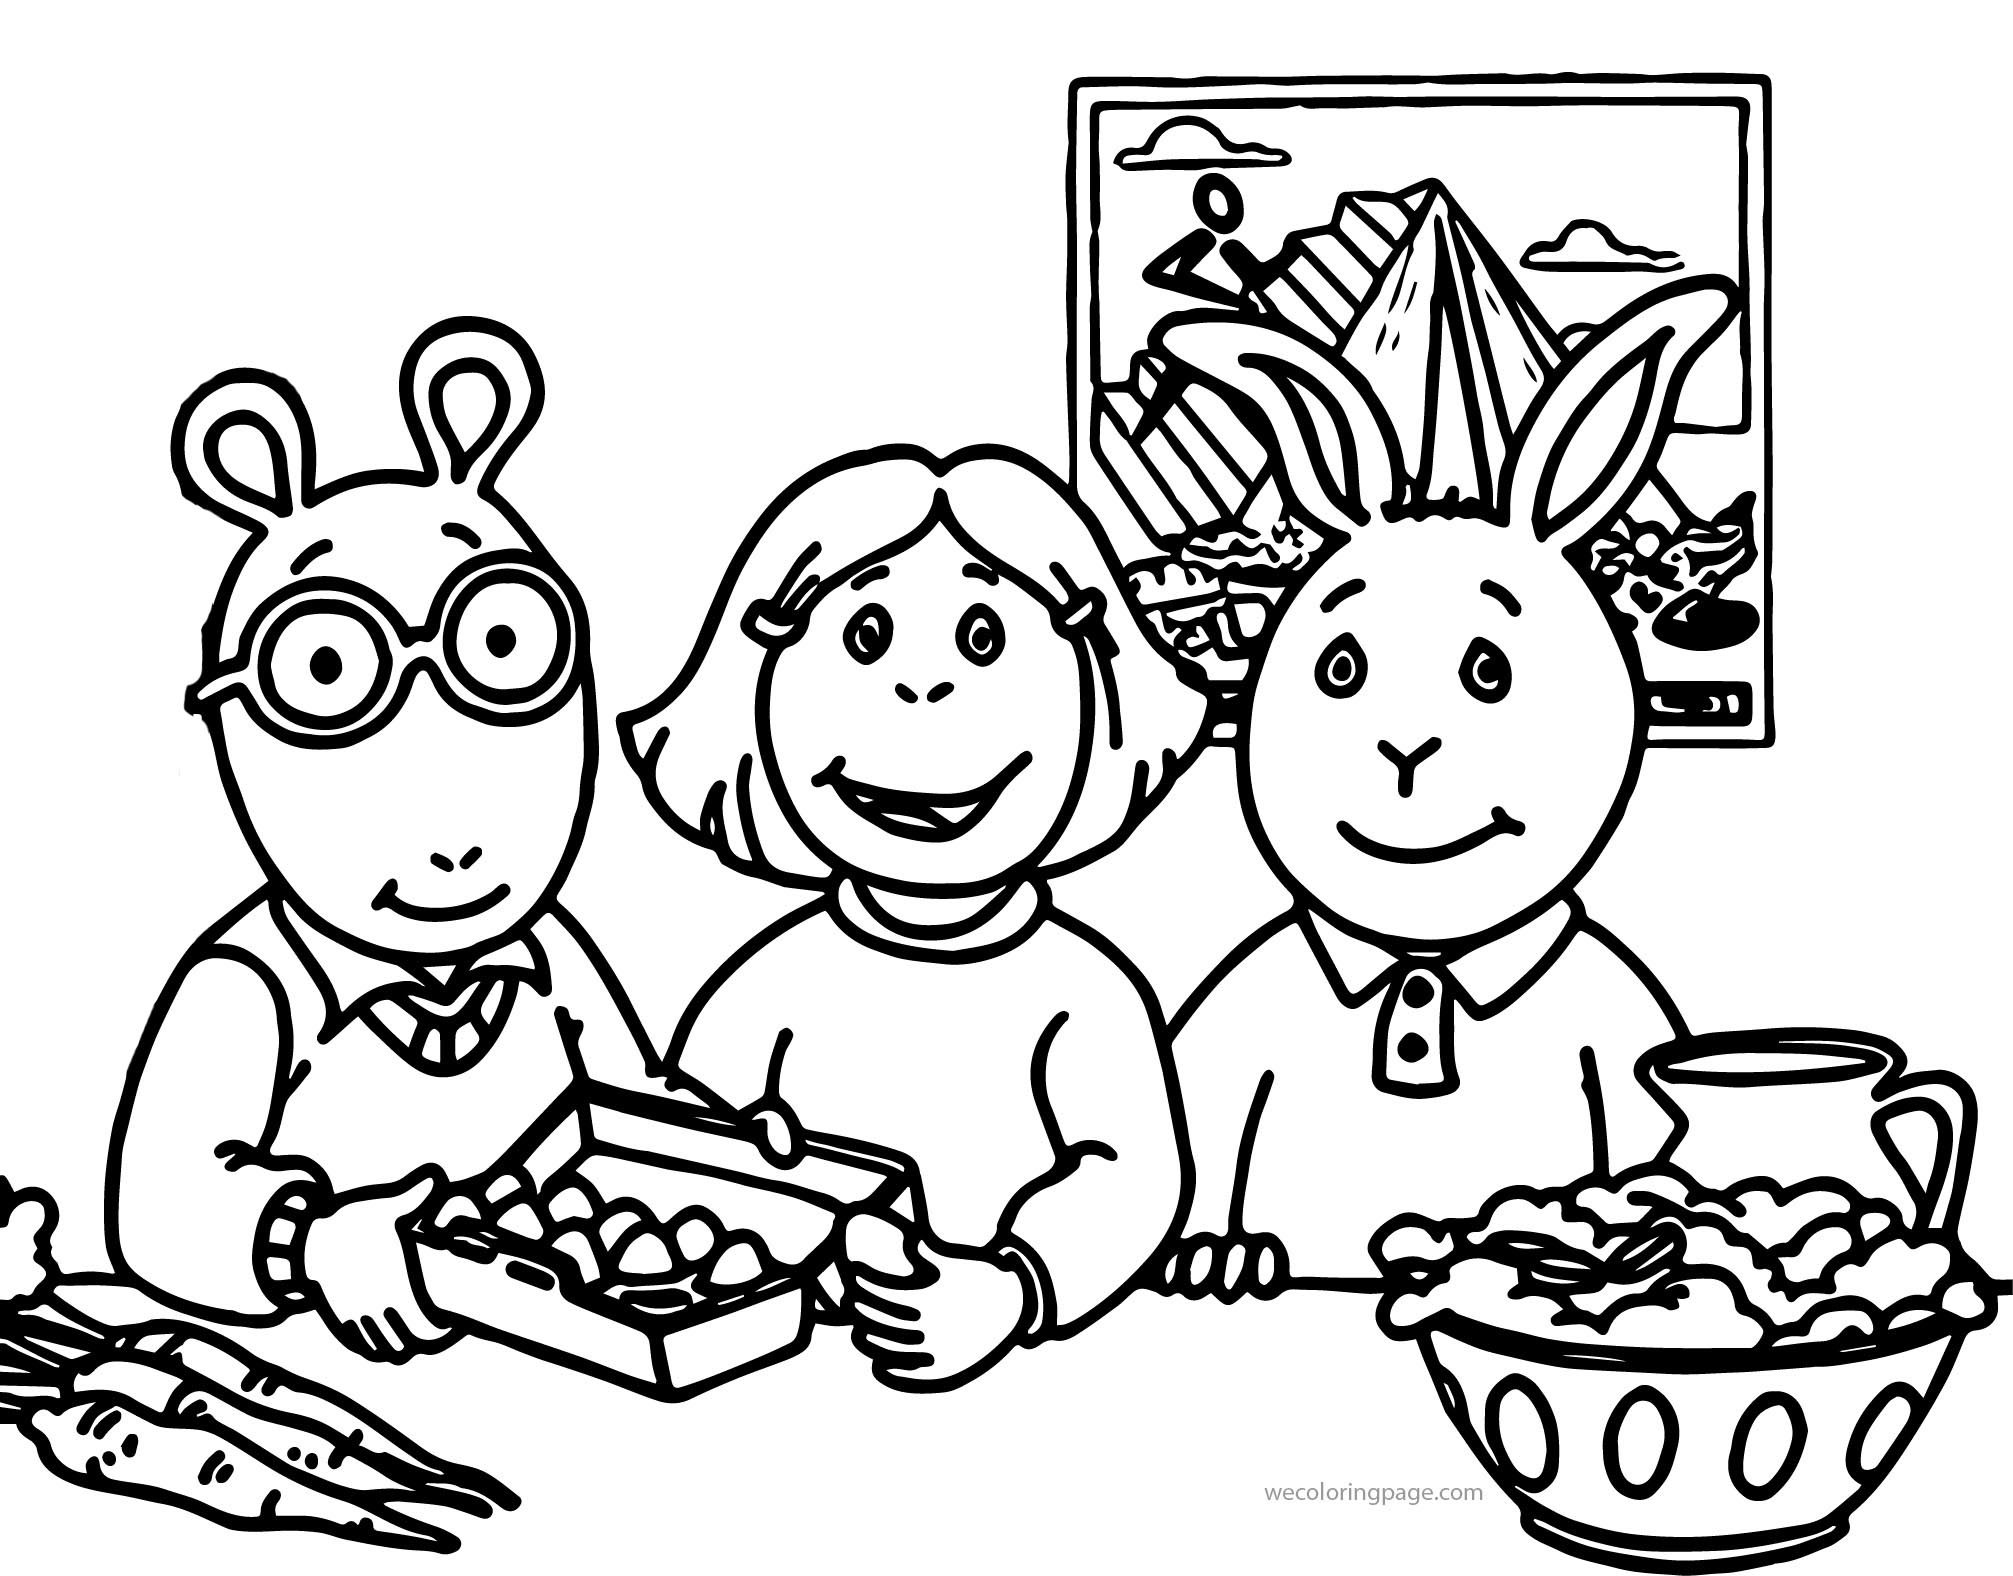 Pbs Kids Coloring Sheets
 Pbs Kids Colouring Pages Sketch Coloring Page